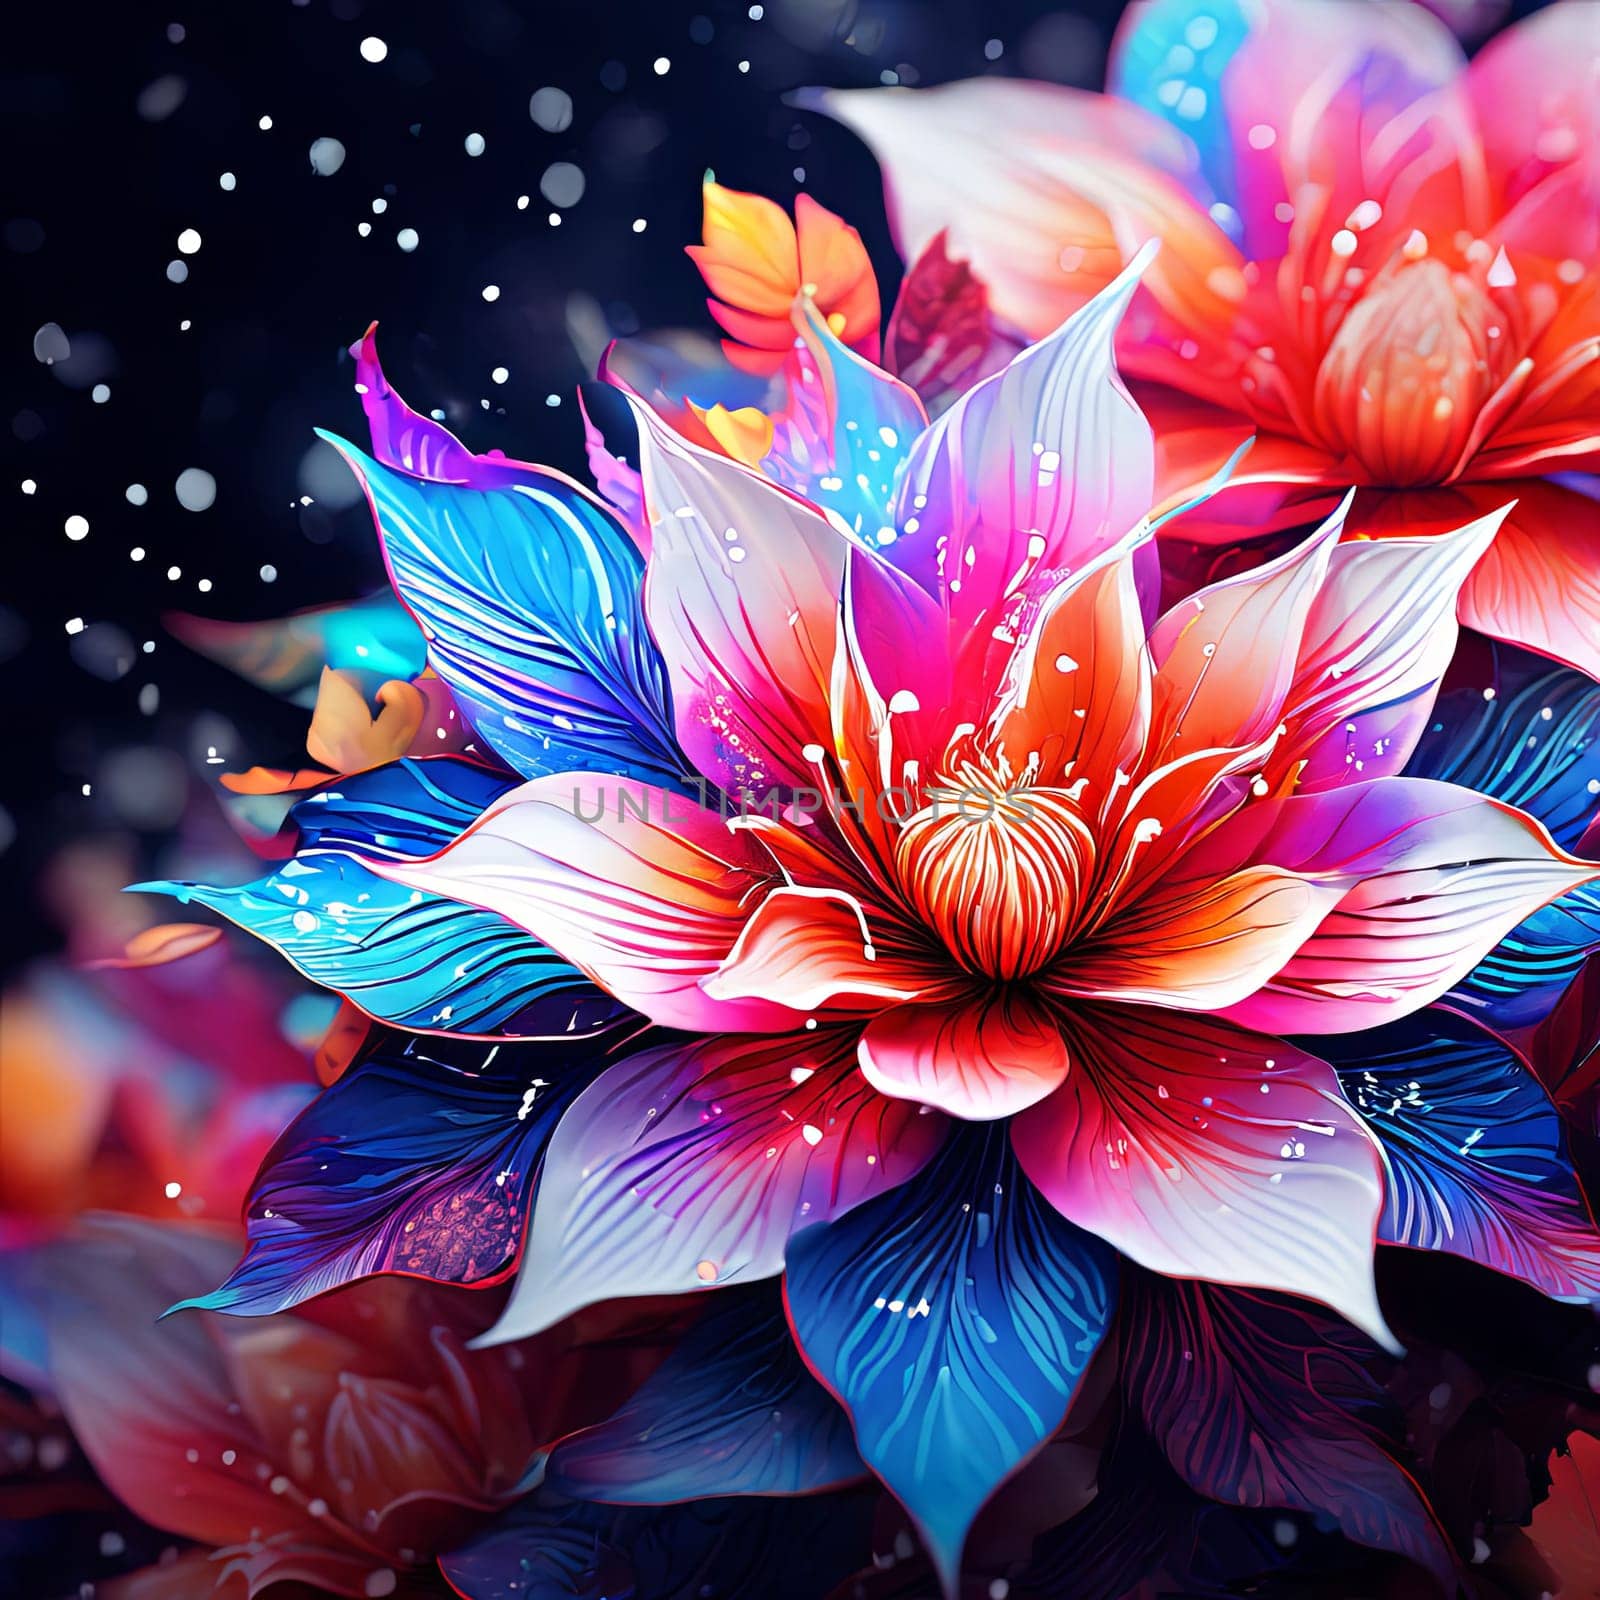 Beautiful lotus flower blooming against dark background. Lotus is symbol of purity, beauty, spiritual enlightenment in many cultures. For interior, commercial spaces to create stylish atmosphere